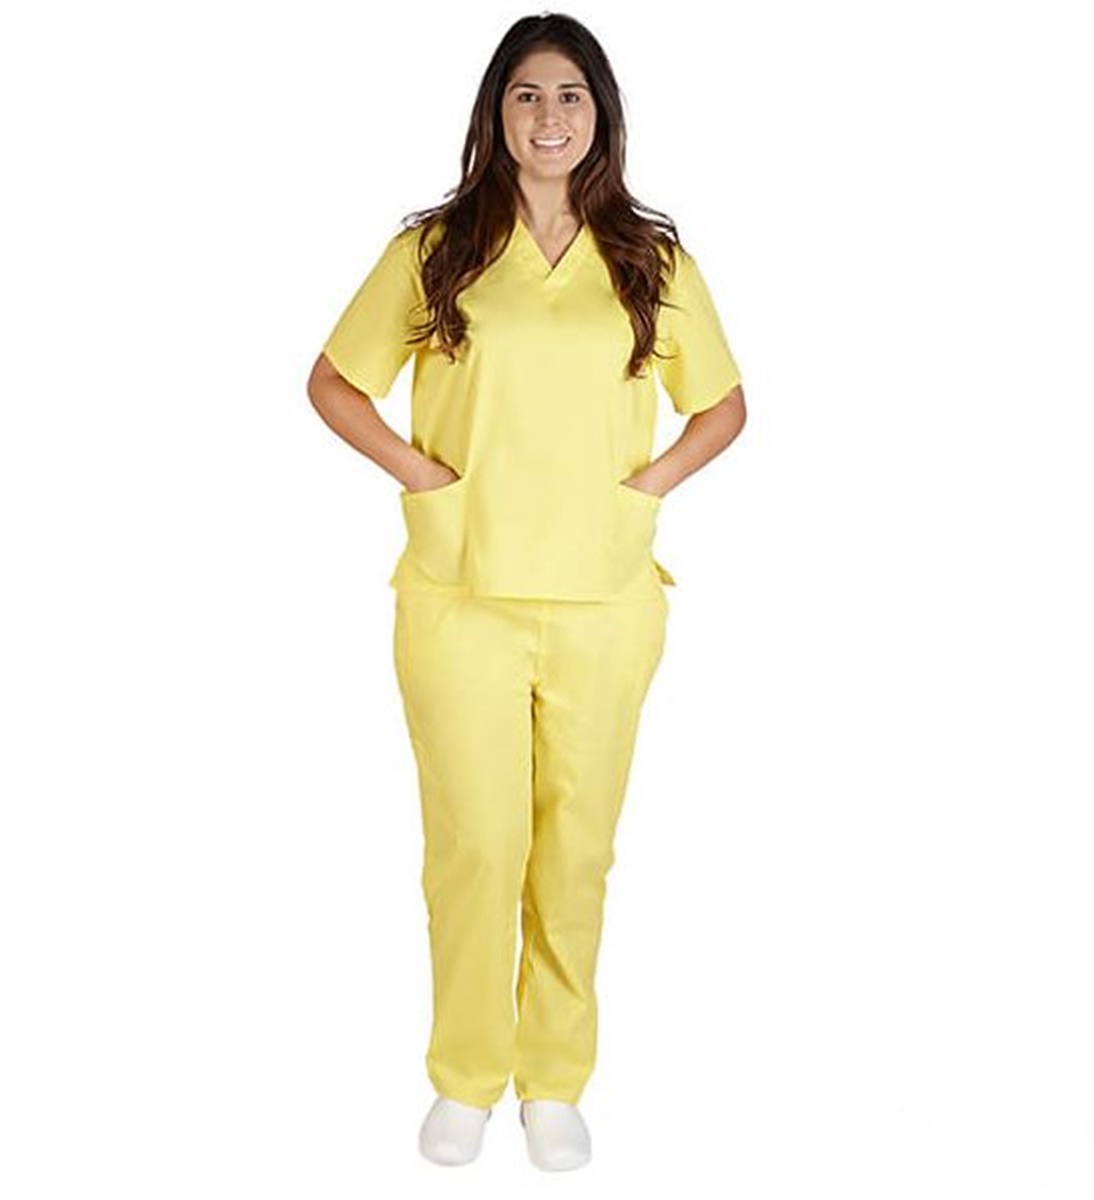  Natural Uniforms Women's Scrub Set Medical Scrub Tops and Pants  - Pack of 2 Set (XX-Small, Black) : Clothing, Shoes & Jewelry